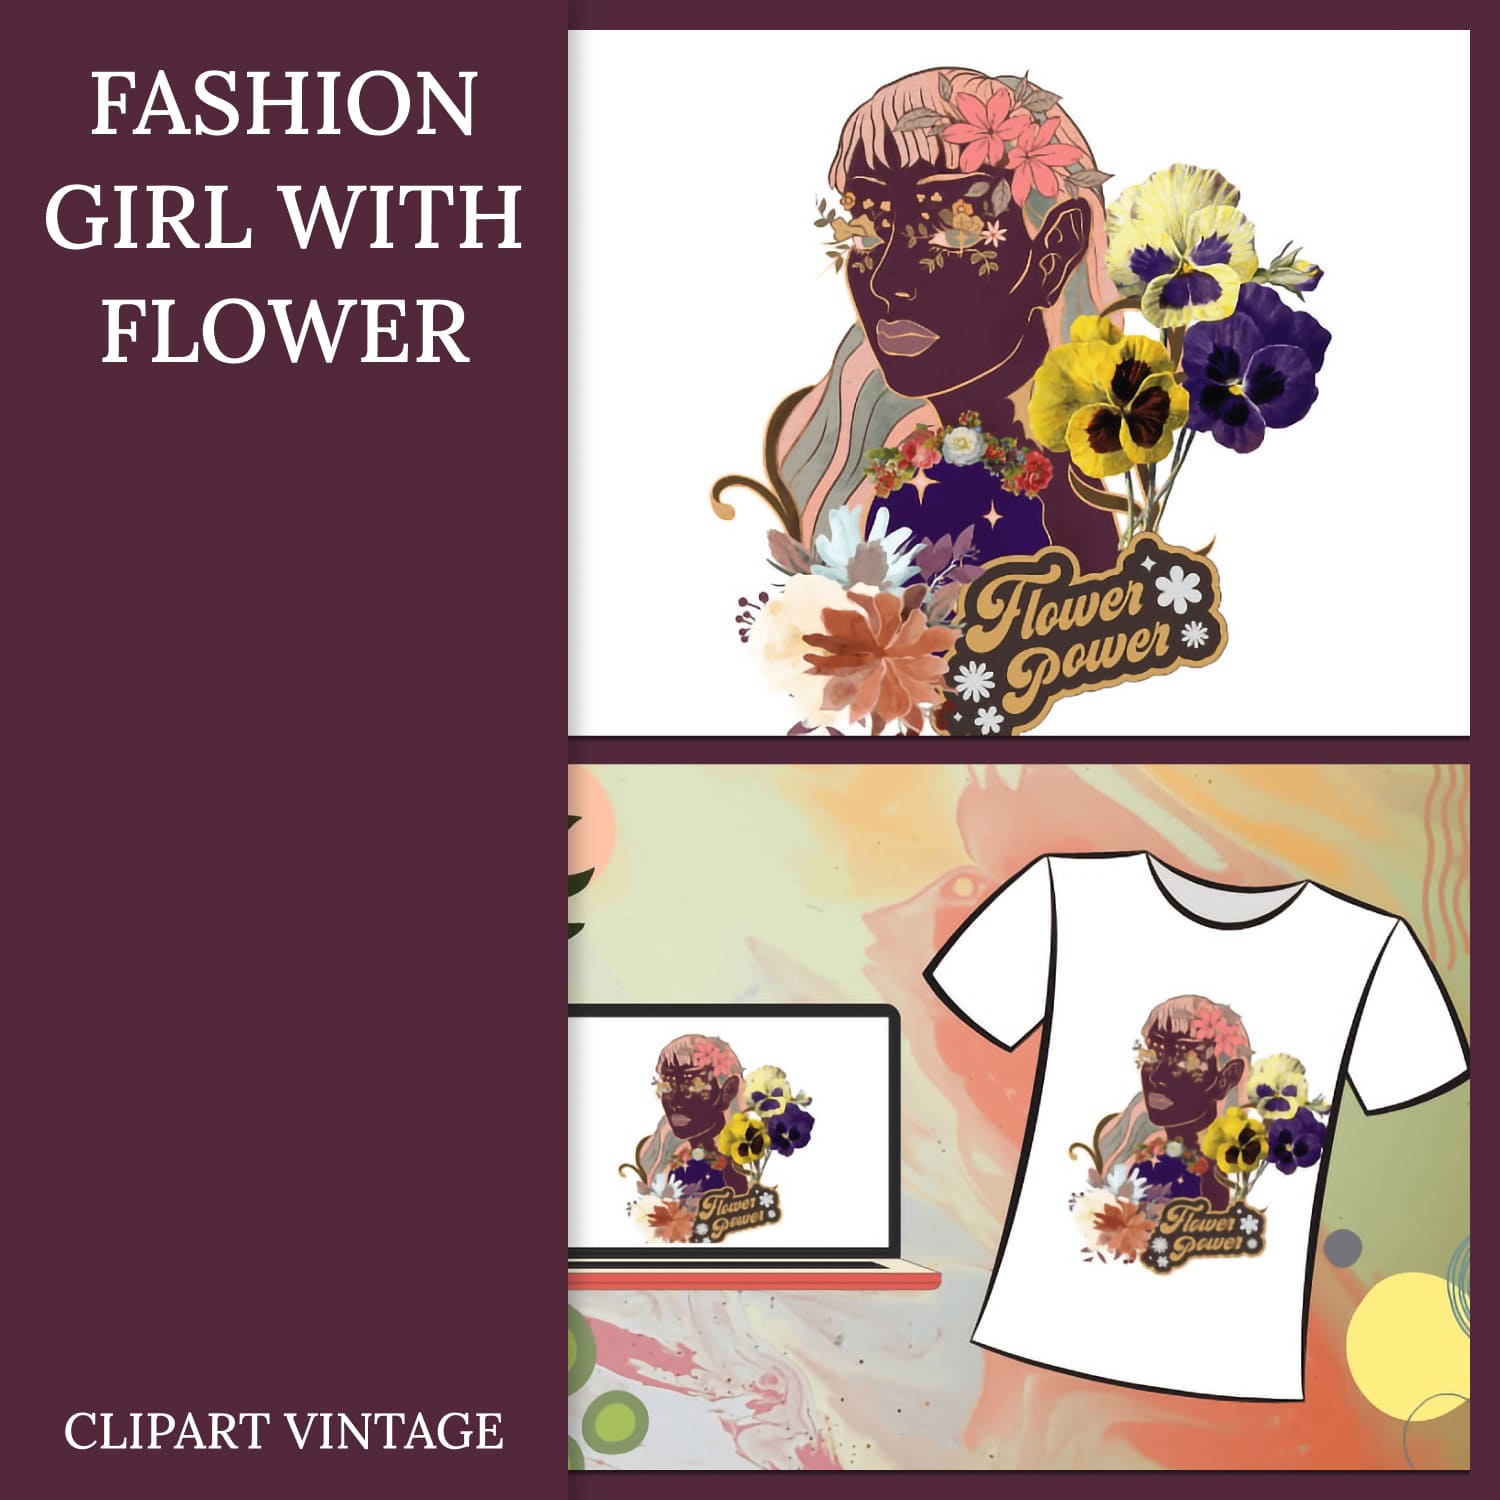 Fashion Girl with Flower Clipart Vintage.